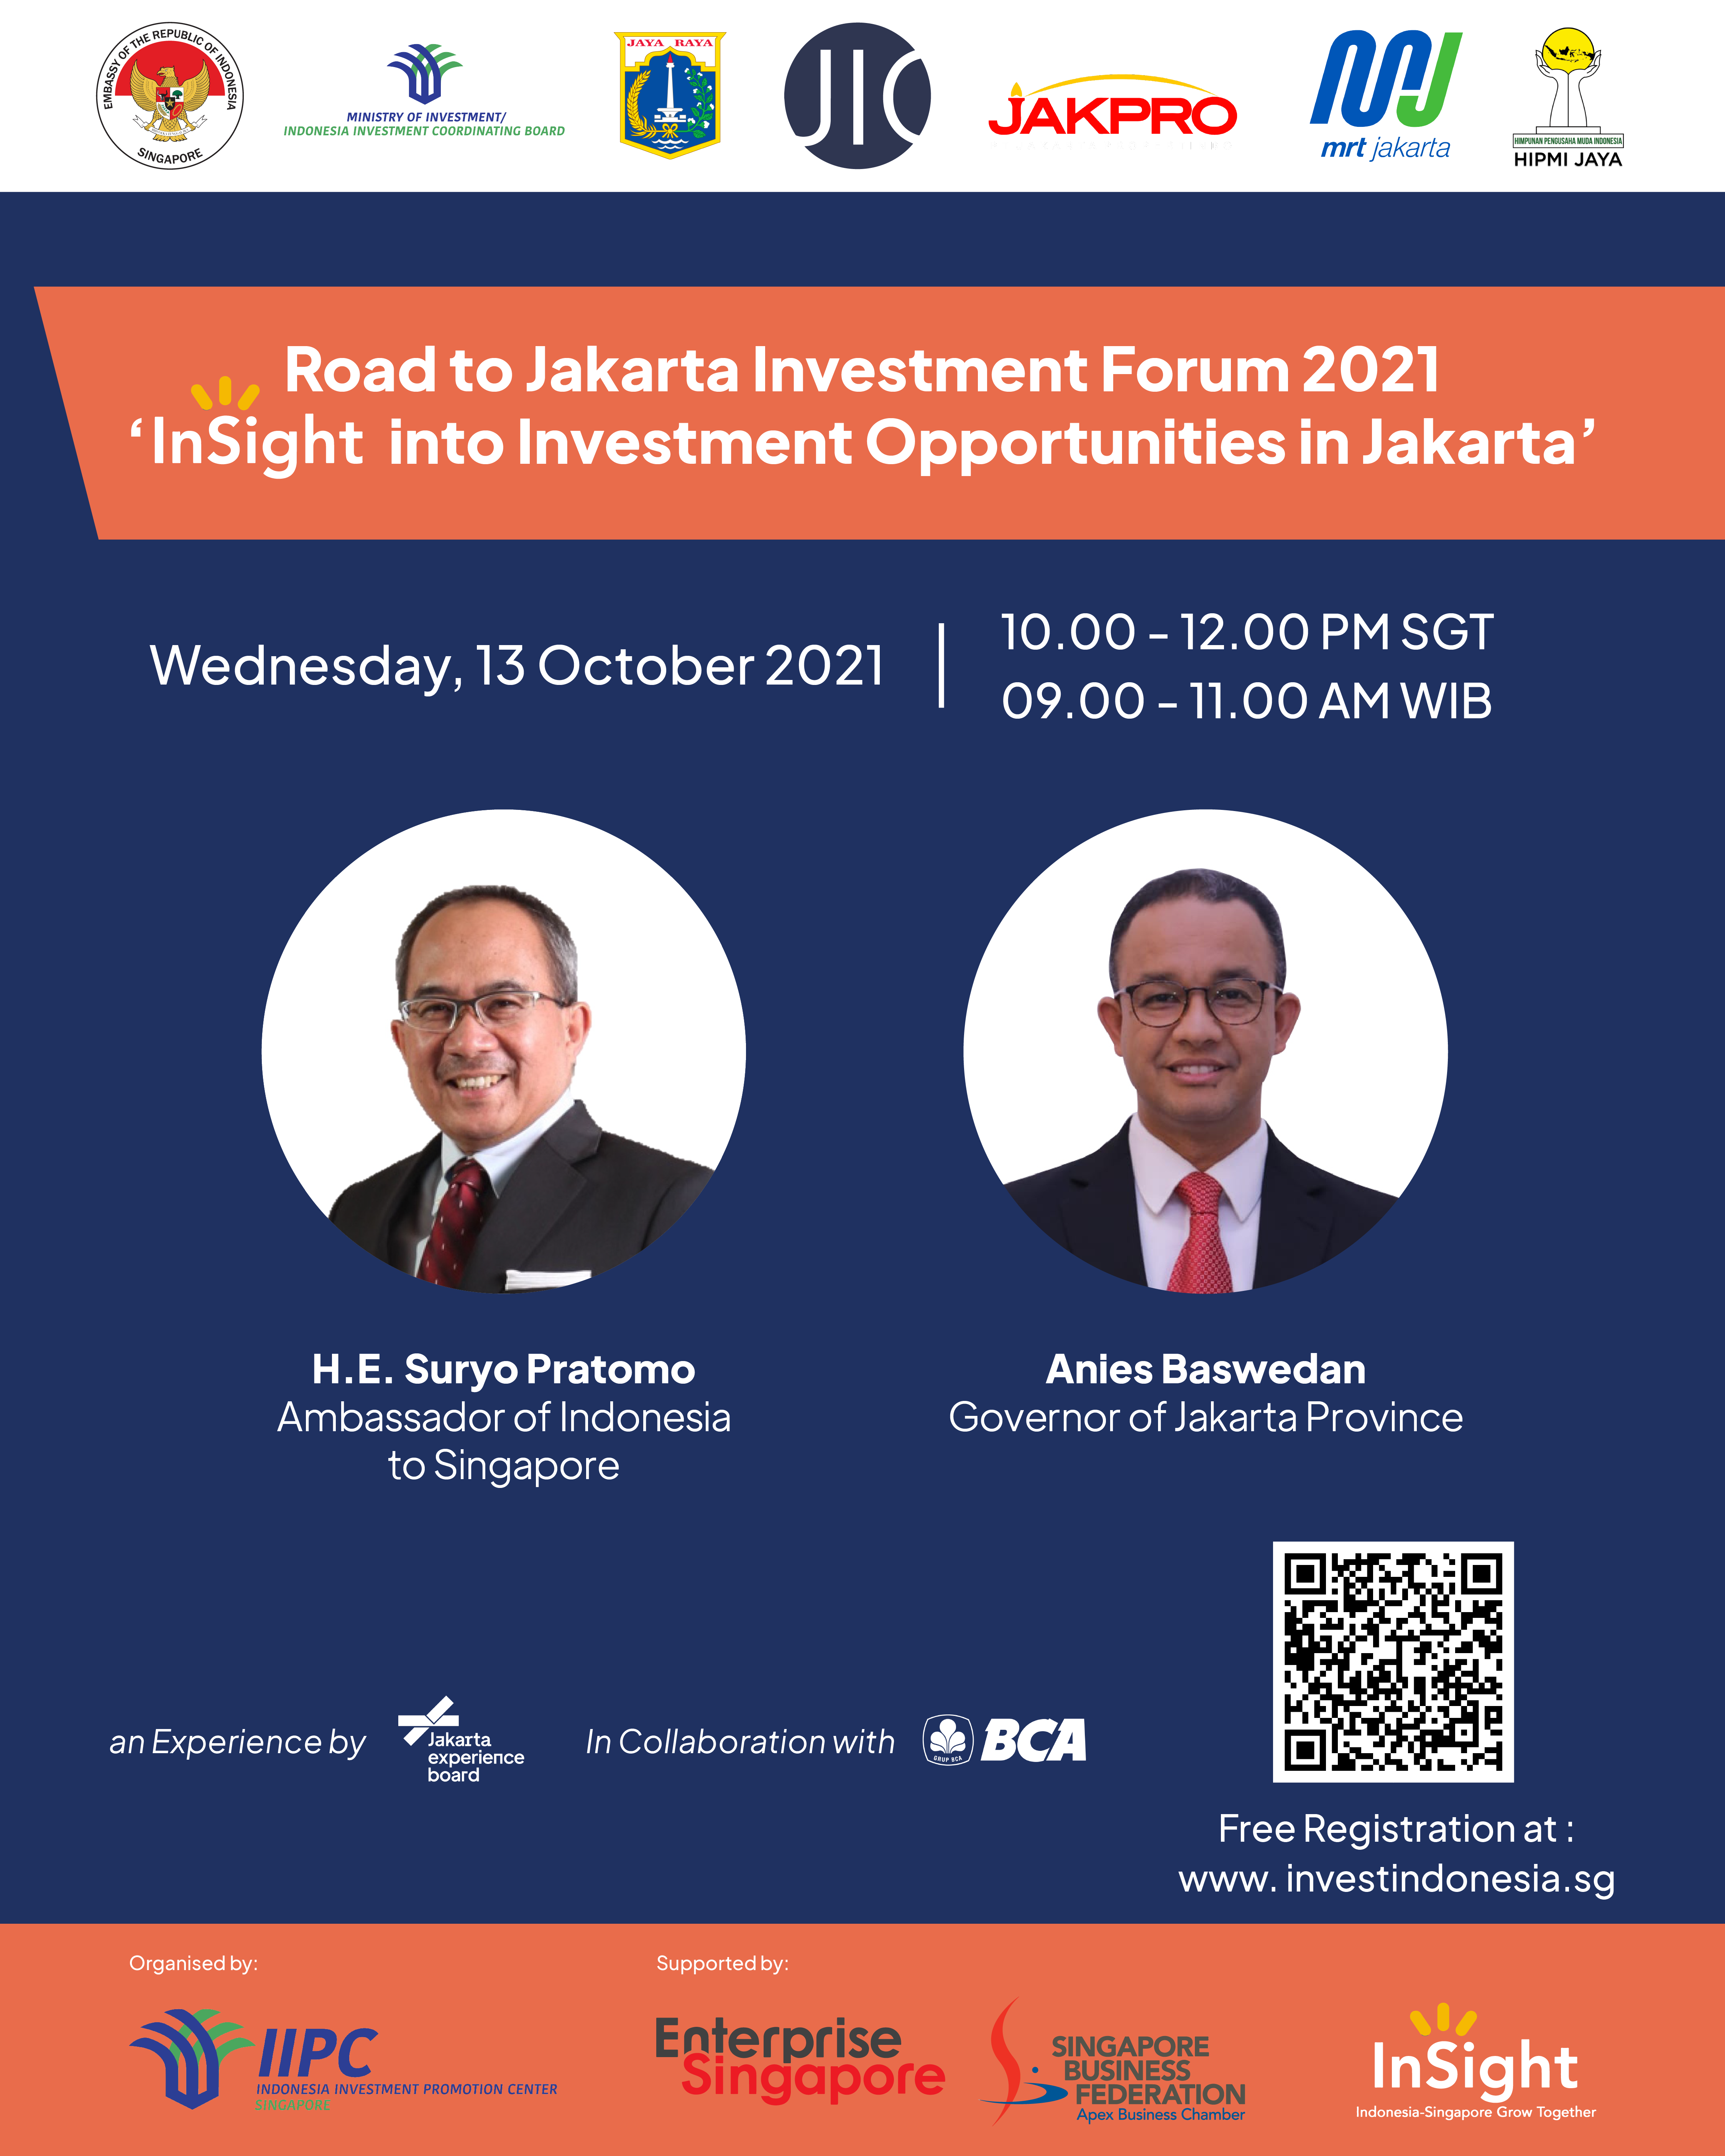 Road to Jakarta Investment Forum 2021 "Insight into Investment Opportunities in Jakarta"